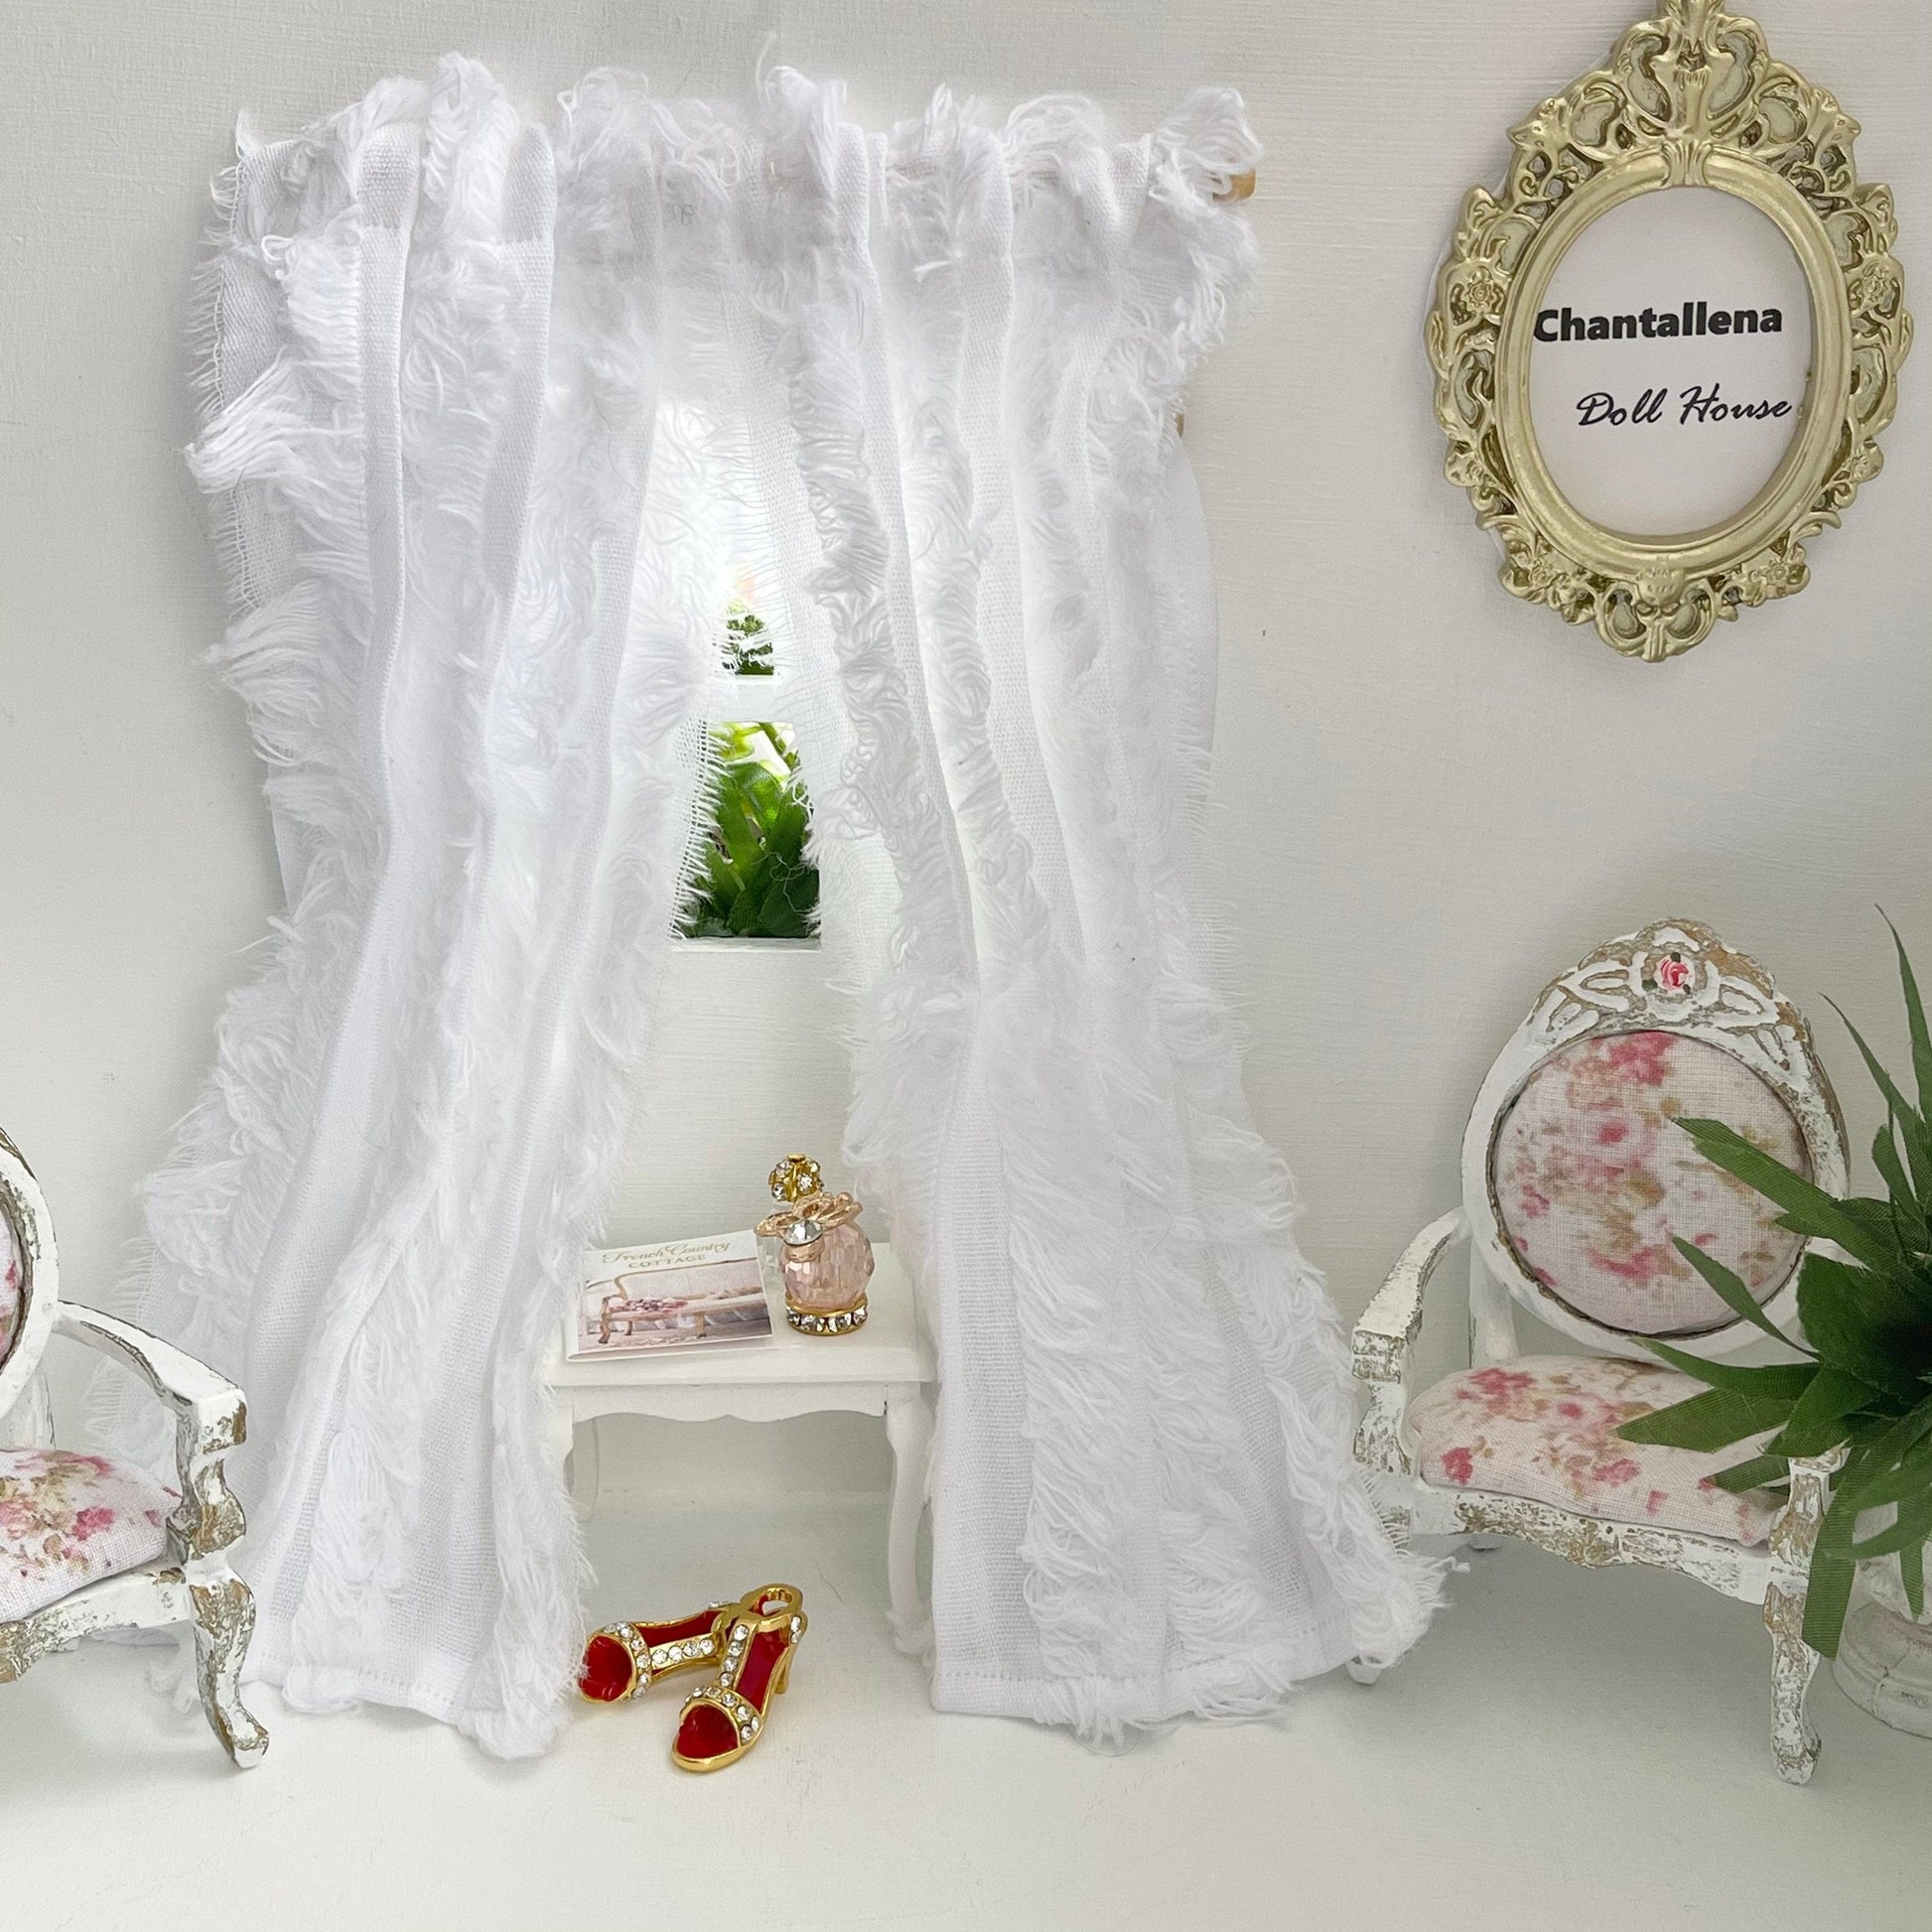 Chantallena Doll House 1 Curtain with rod CURTAINS - White Fringed 2 Panel Cotton Curtains | White Fringe | Soft Furnishings